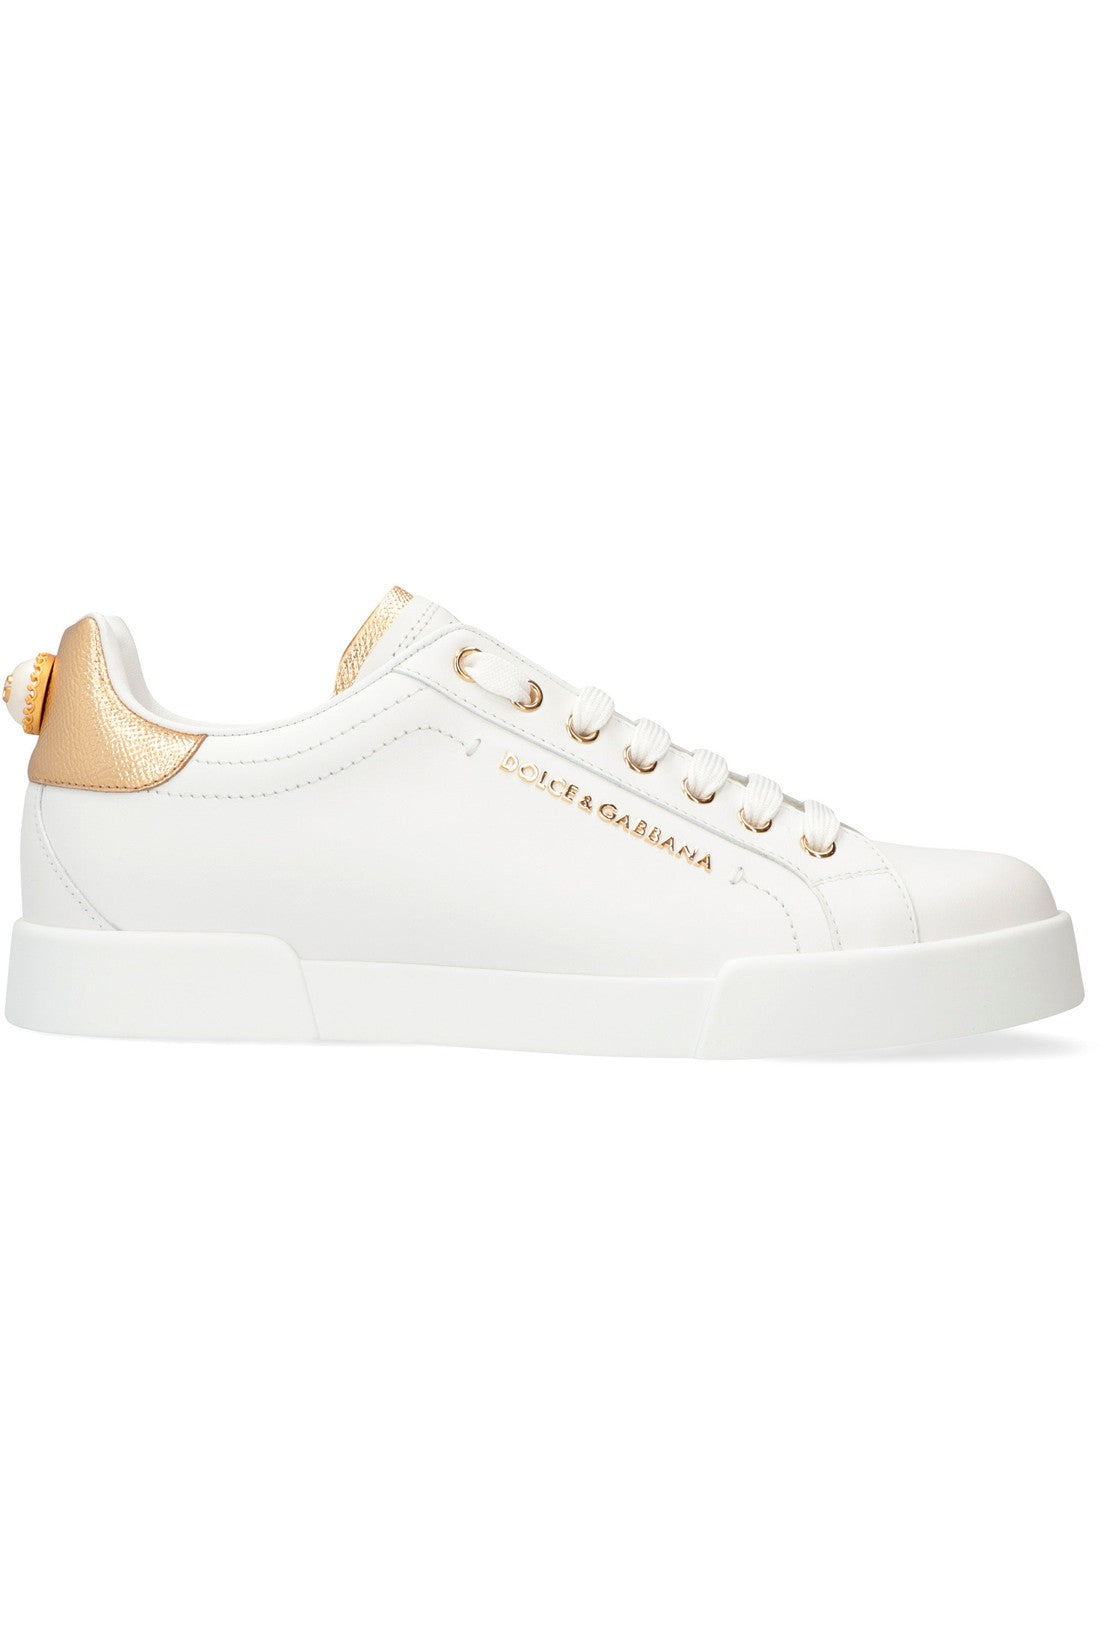 Dolce & Gabbana-OUTLET-SALE-Portofino leather low-top sneakers-ARCHIVIST